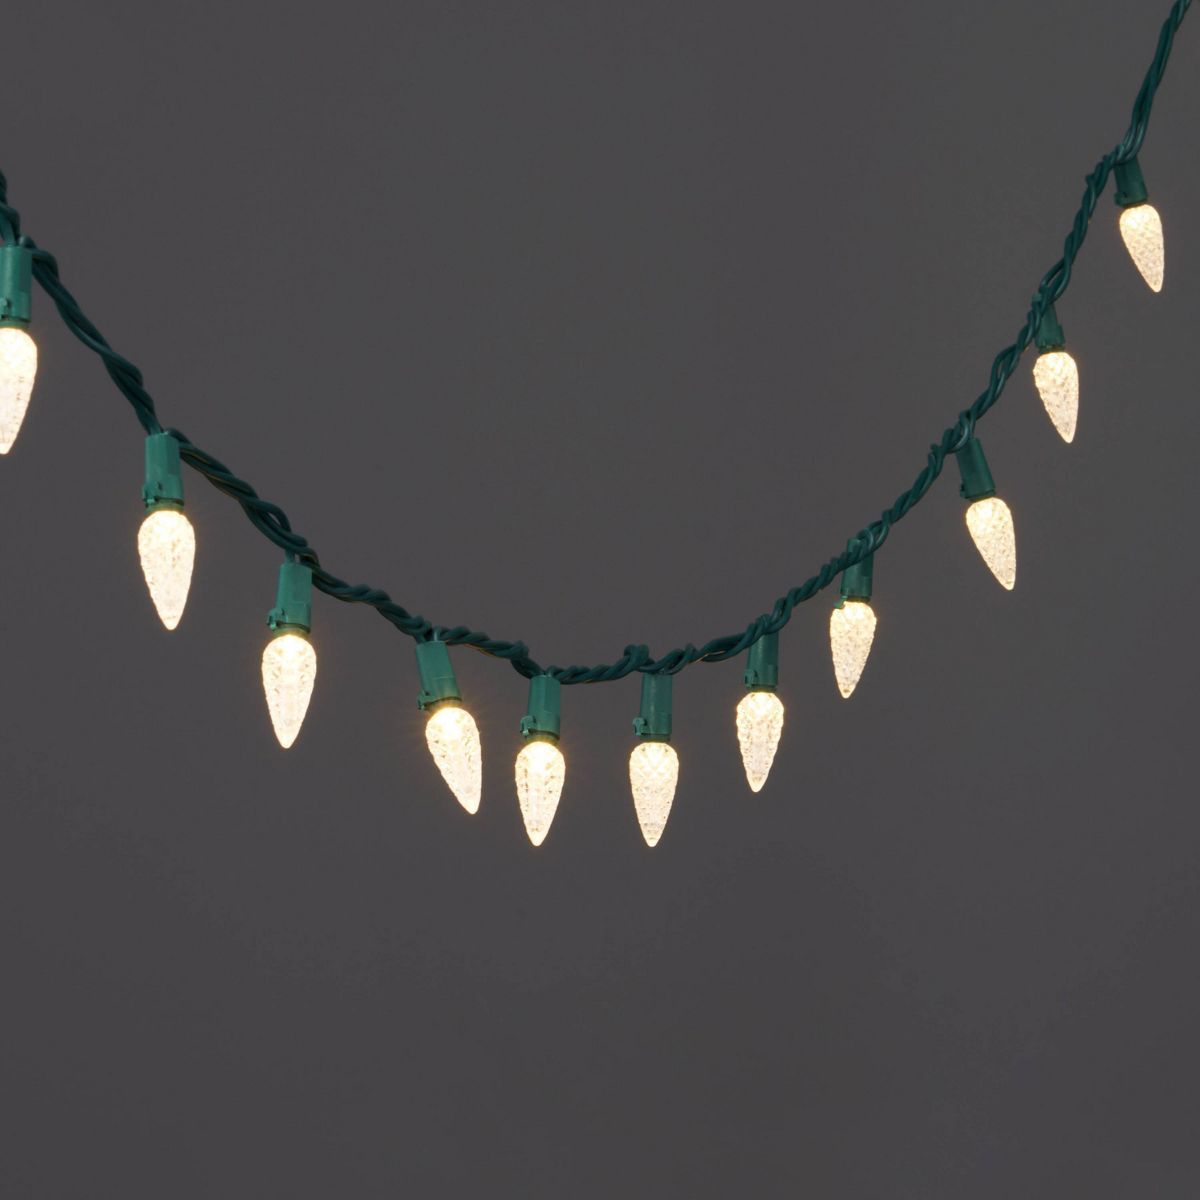 60ct LED C6 Faceted Christmas String Lights Warm White with Green Wire - Wondershop™ | Target